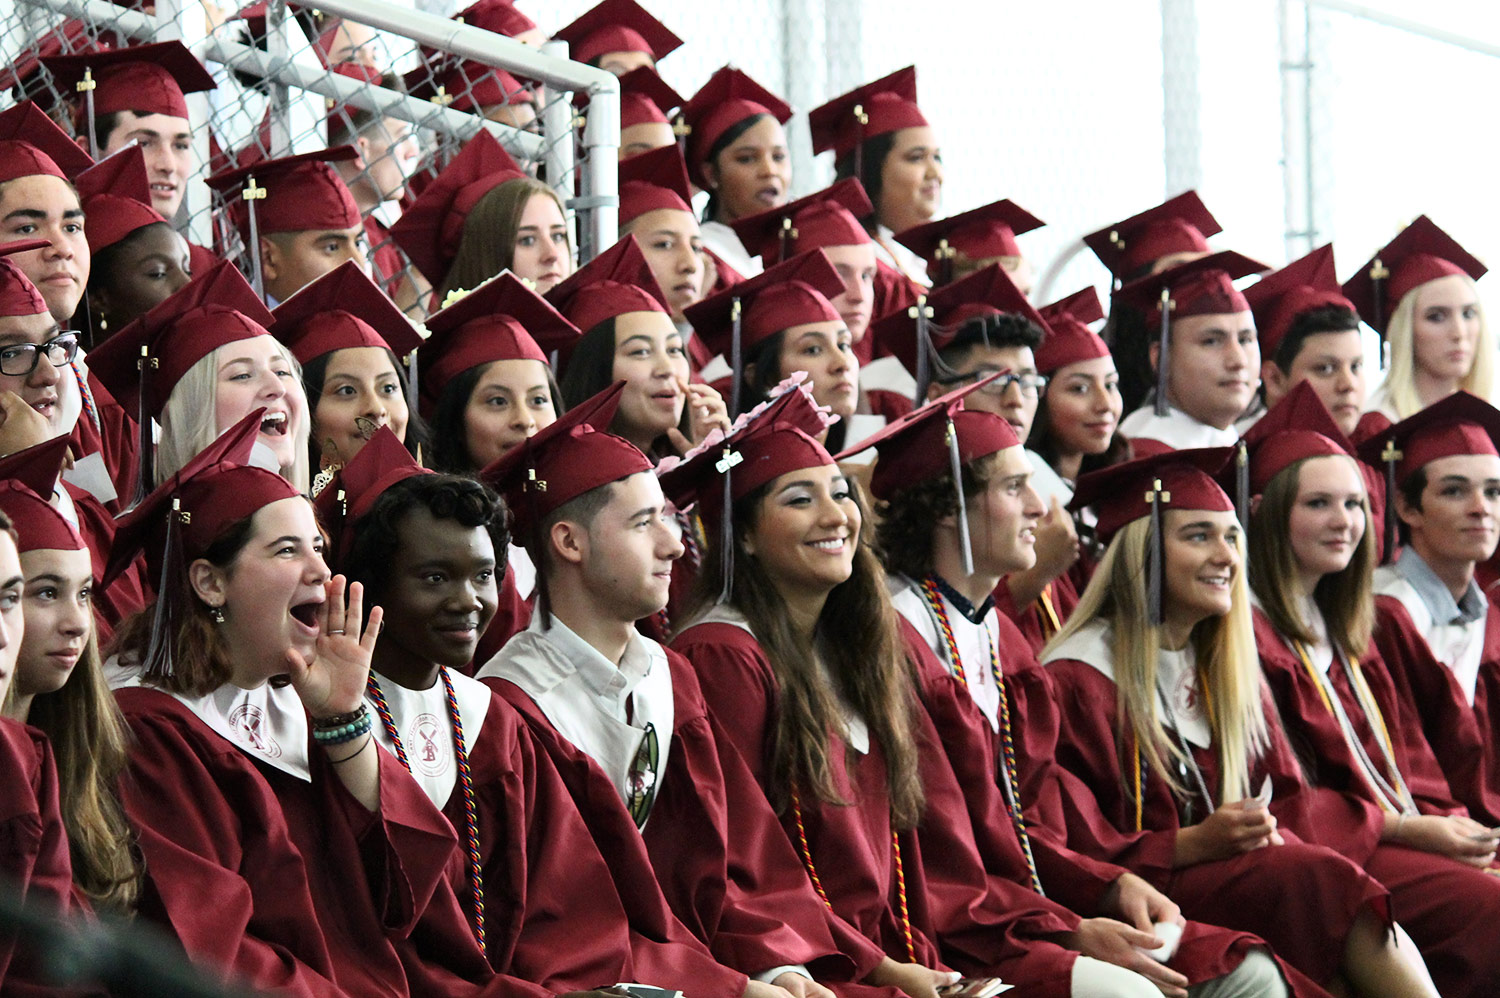 Graduation Requirements May be ‘Updated’ The East Hampton Star